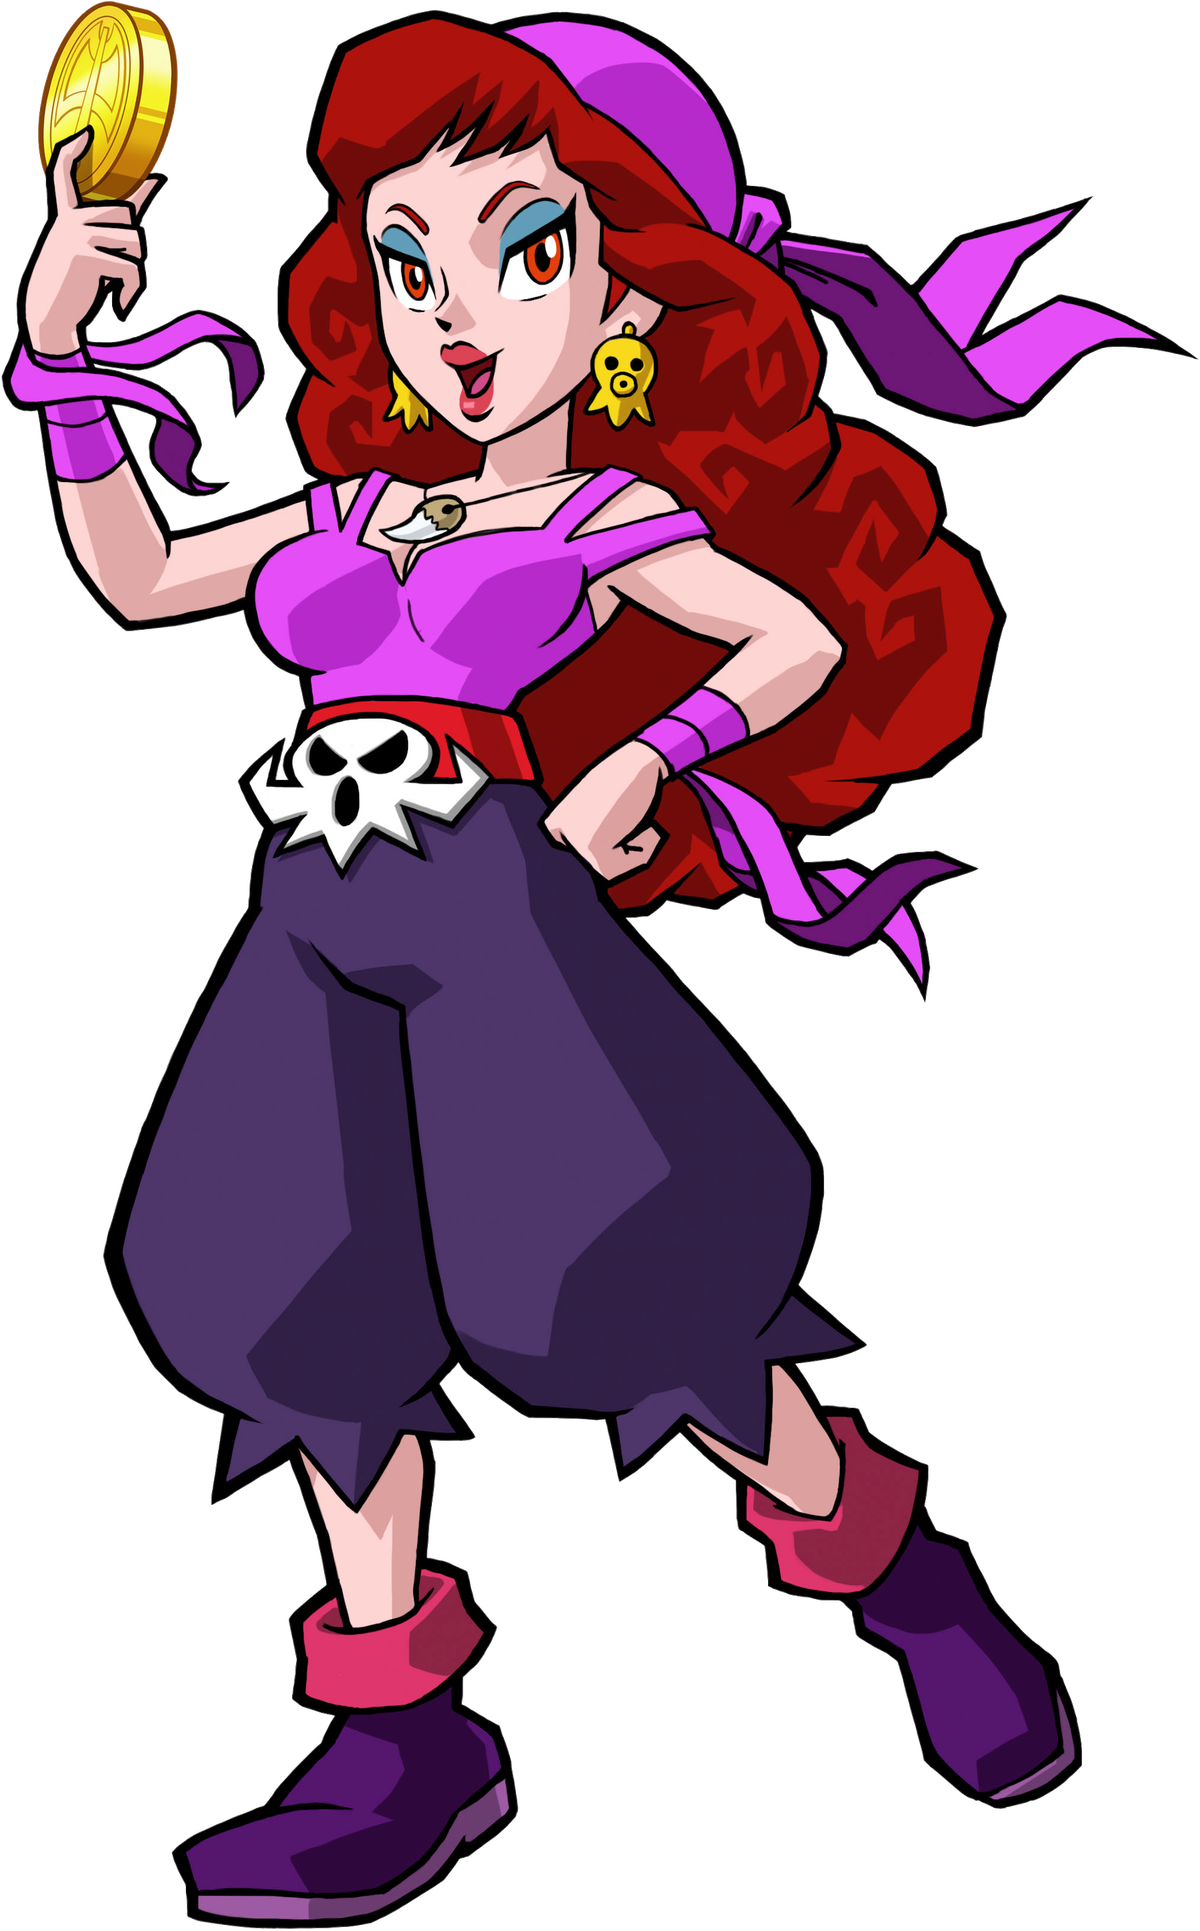 Artwork of Captain Syrup from Wario Land: Shake It!